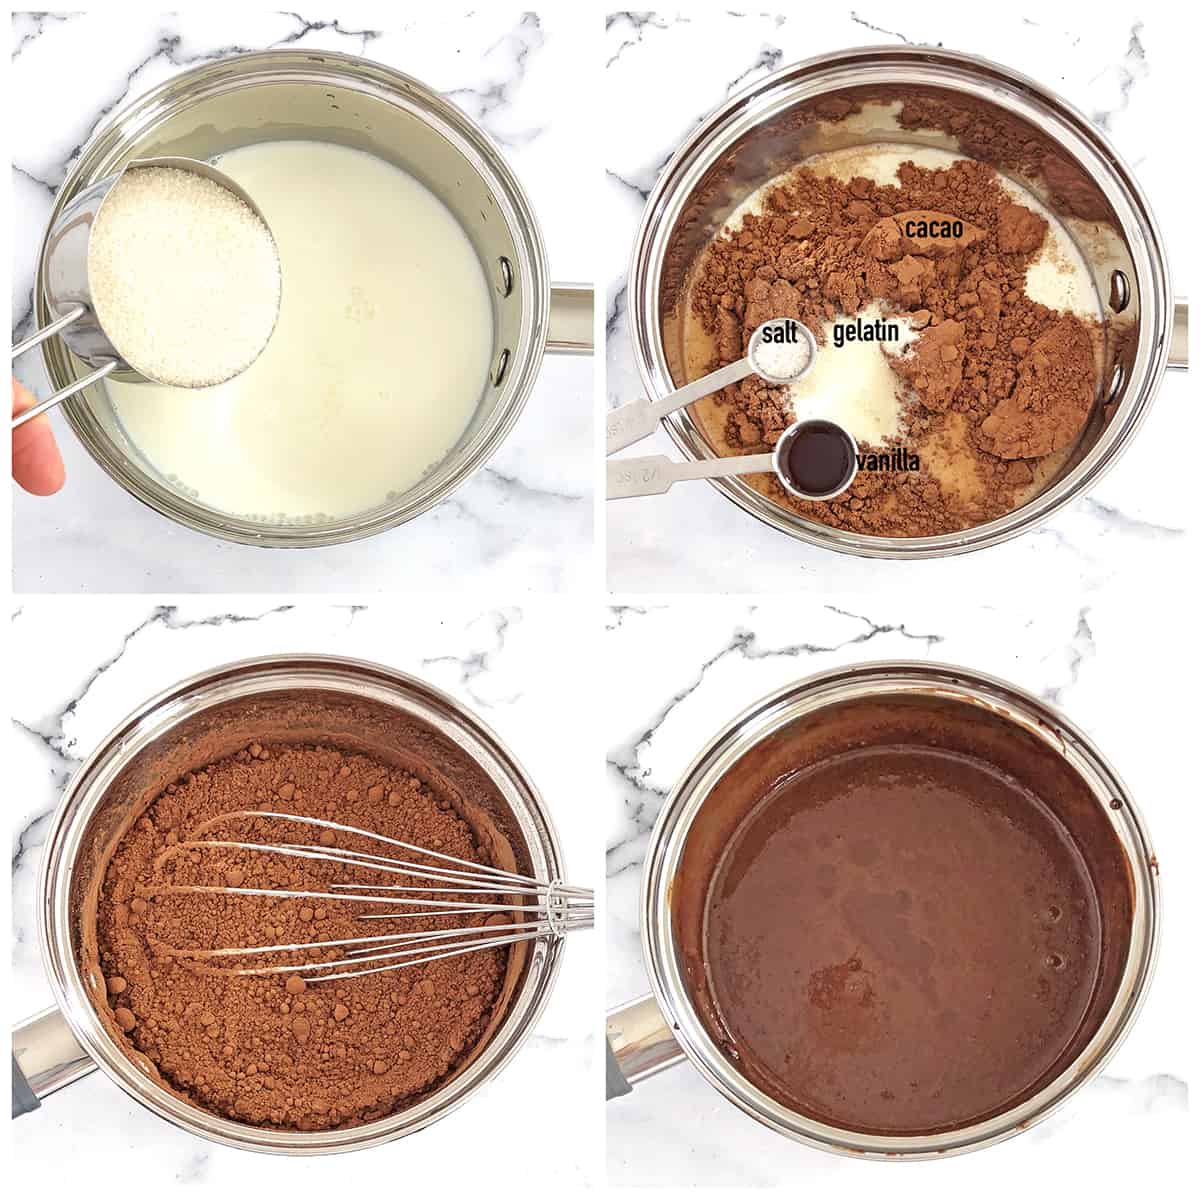 Let's make our cacao topping next! In a small saucepan, combine milk, sugar, cacao, gelatin, vanilla, and salt.